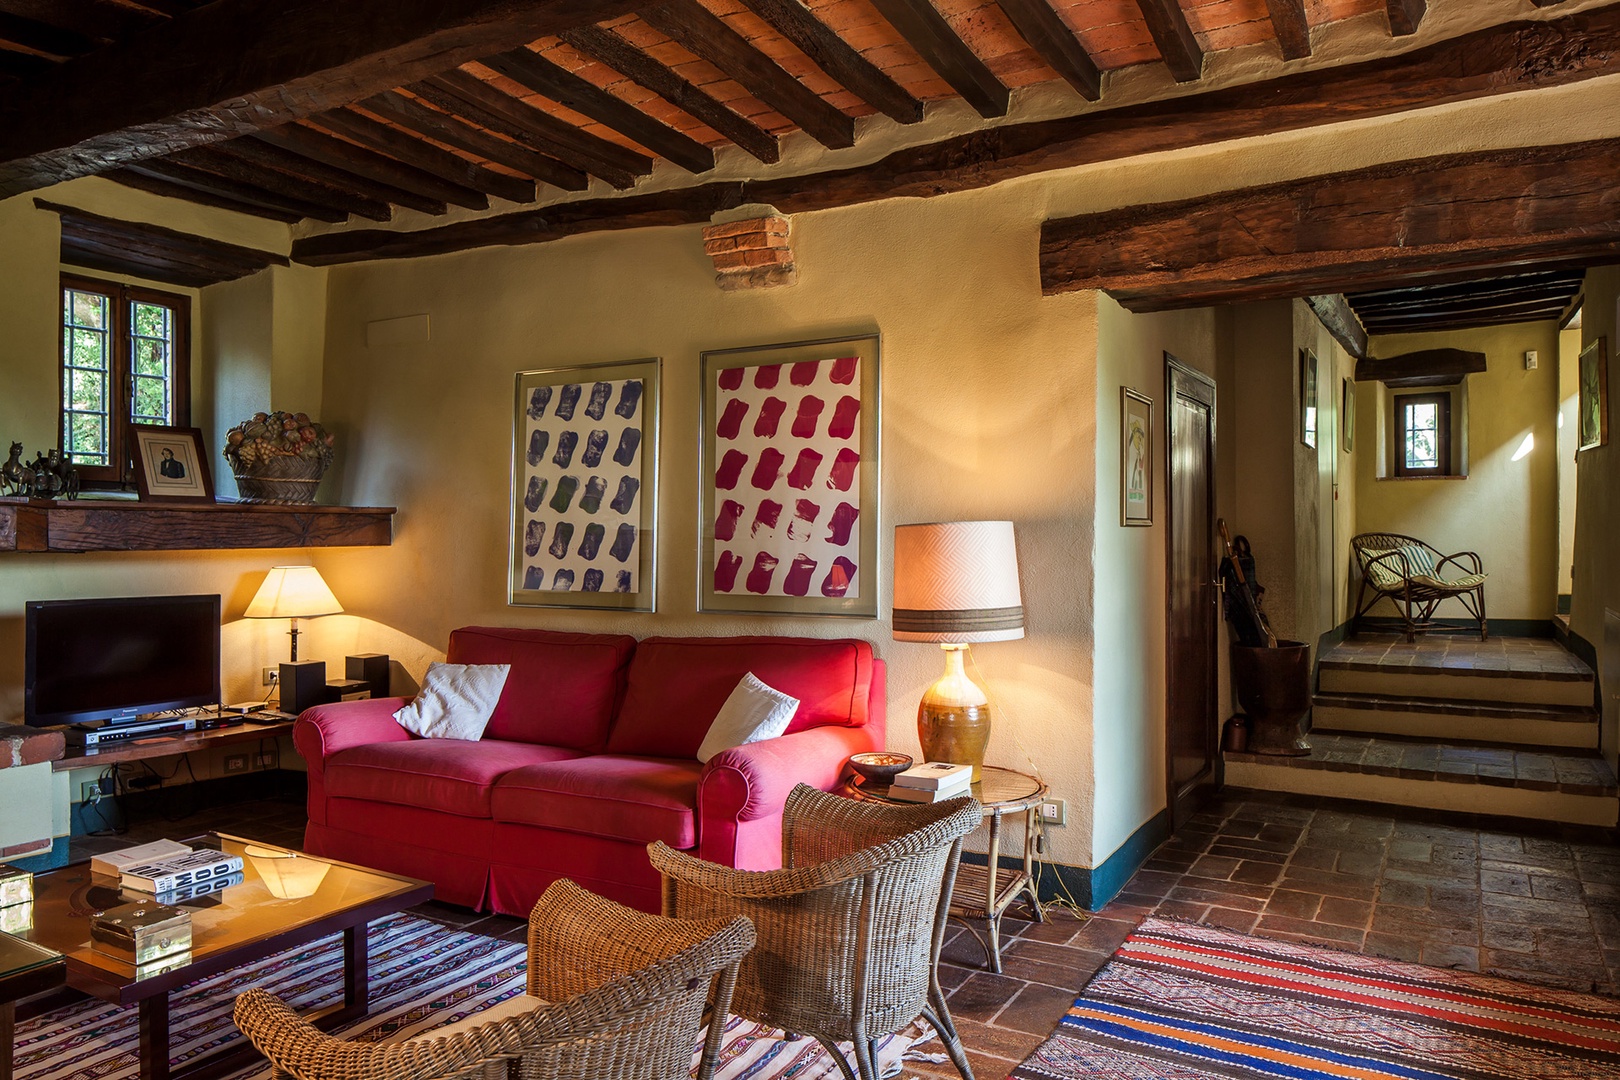 Eclectic artwork, kilim carpets and fabulous beamed ceilings add interest and architectural charm.